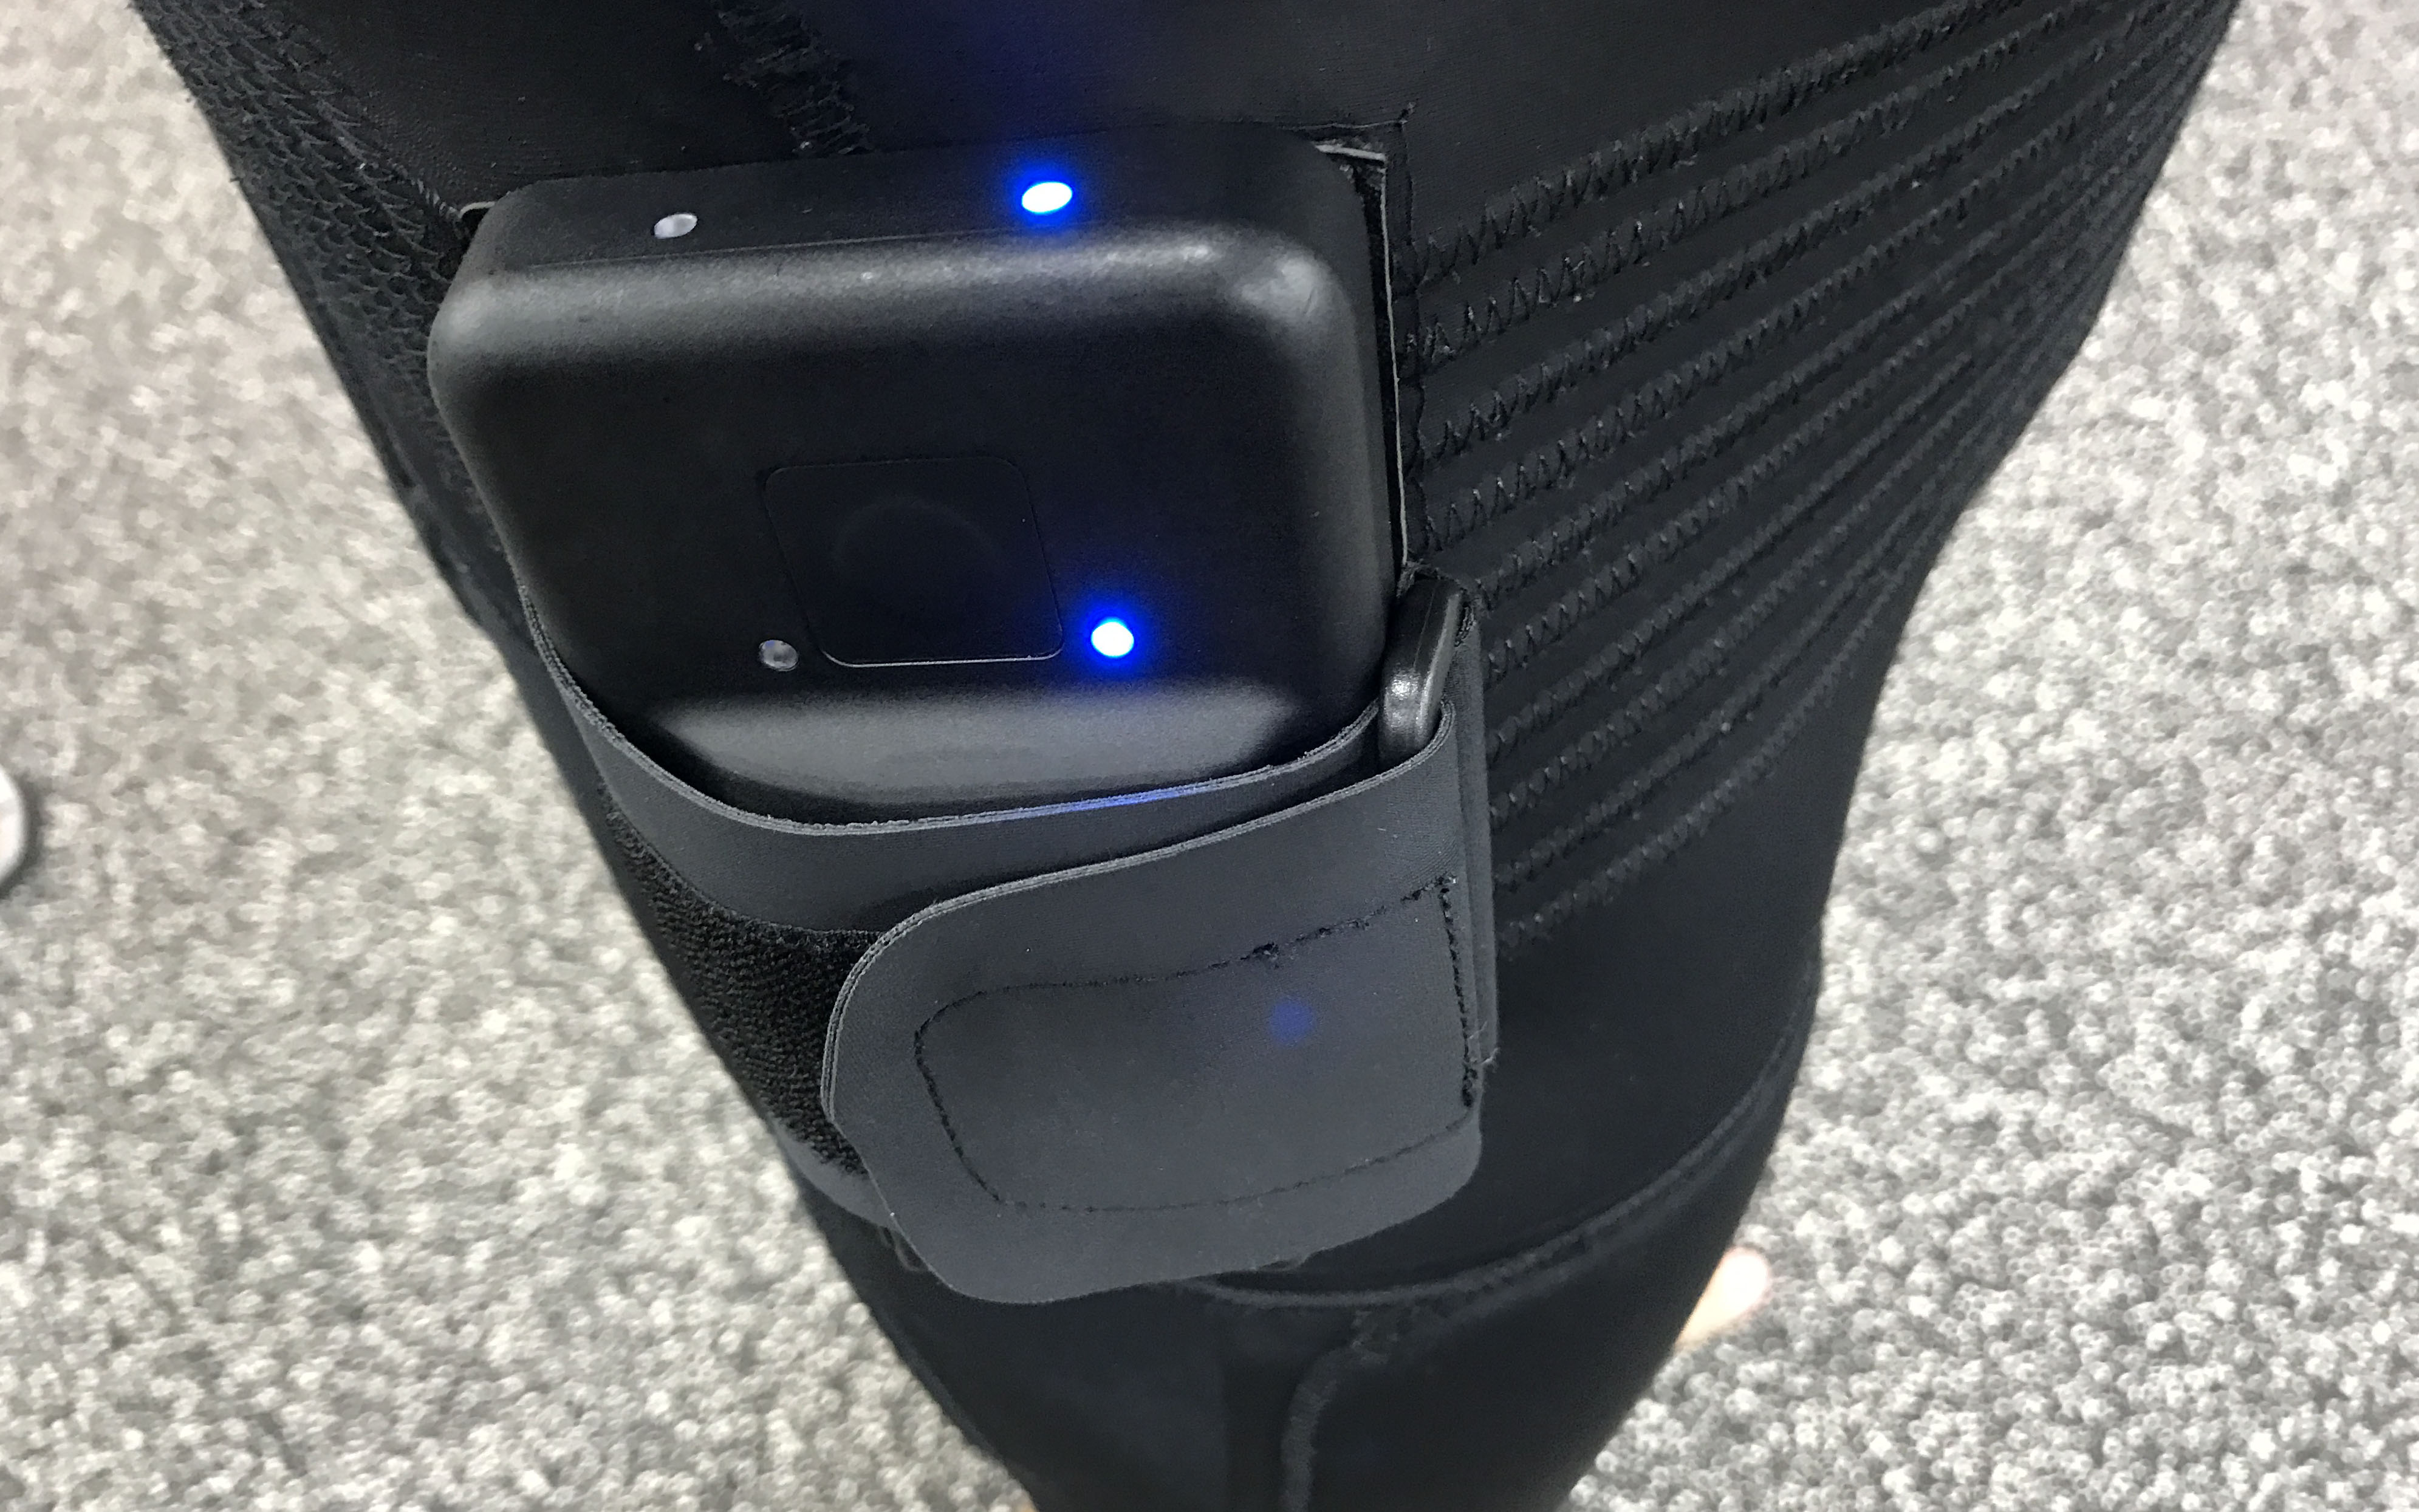 The VisionBody Powersuit battery pack.